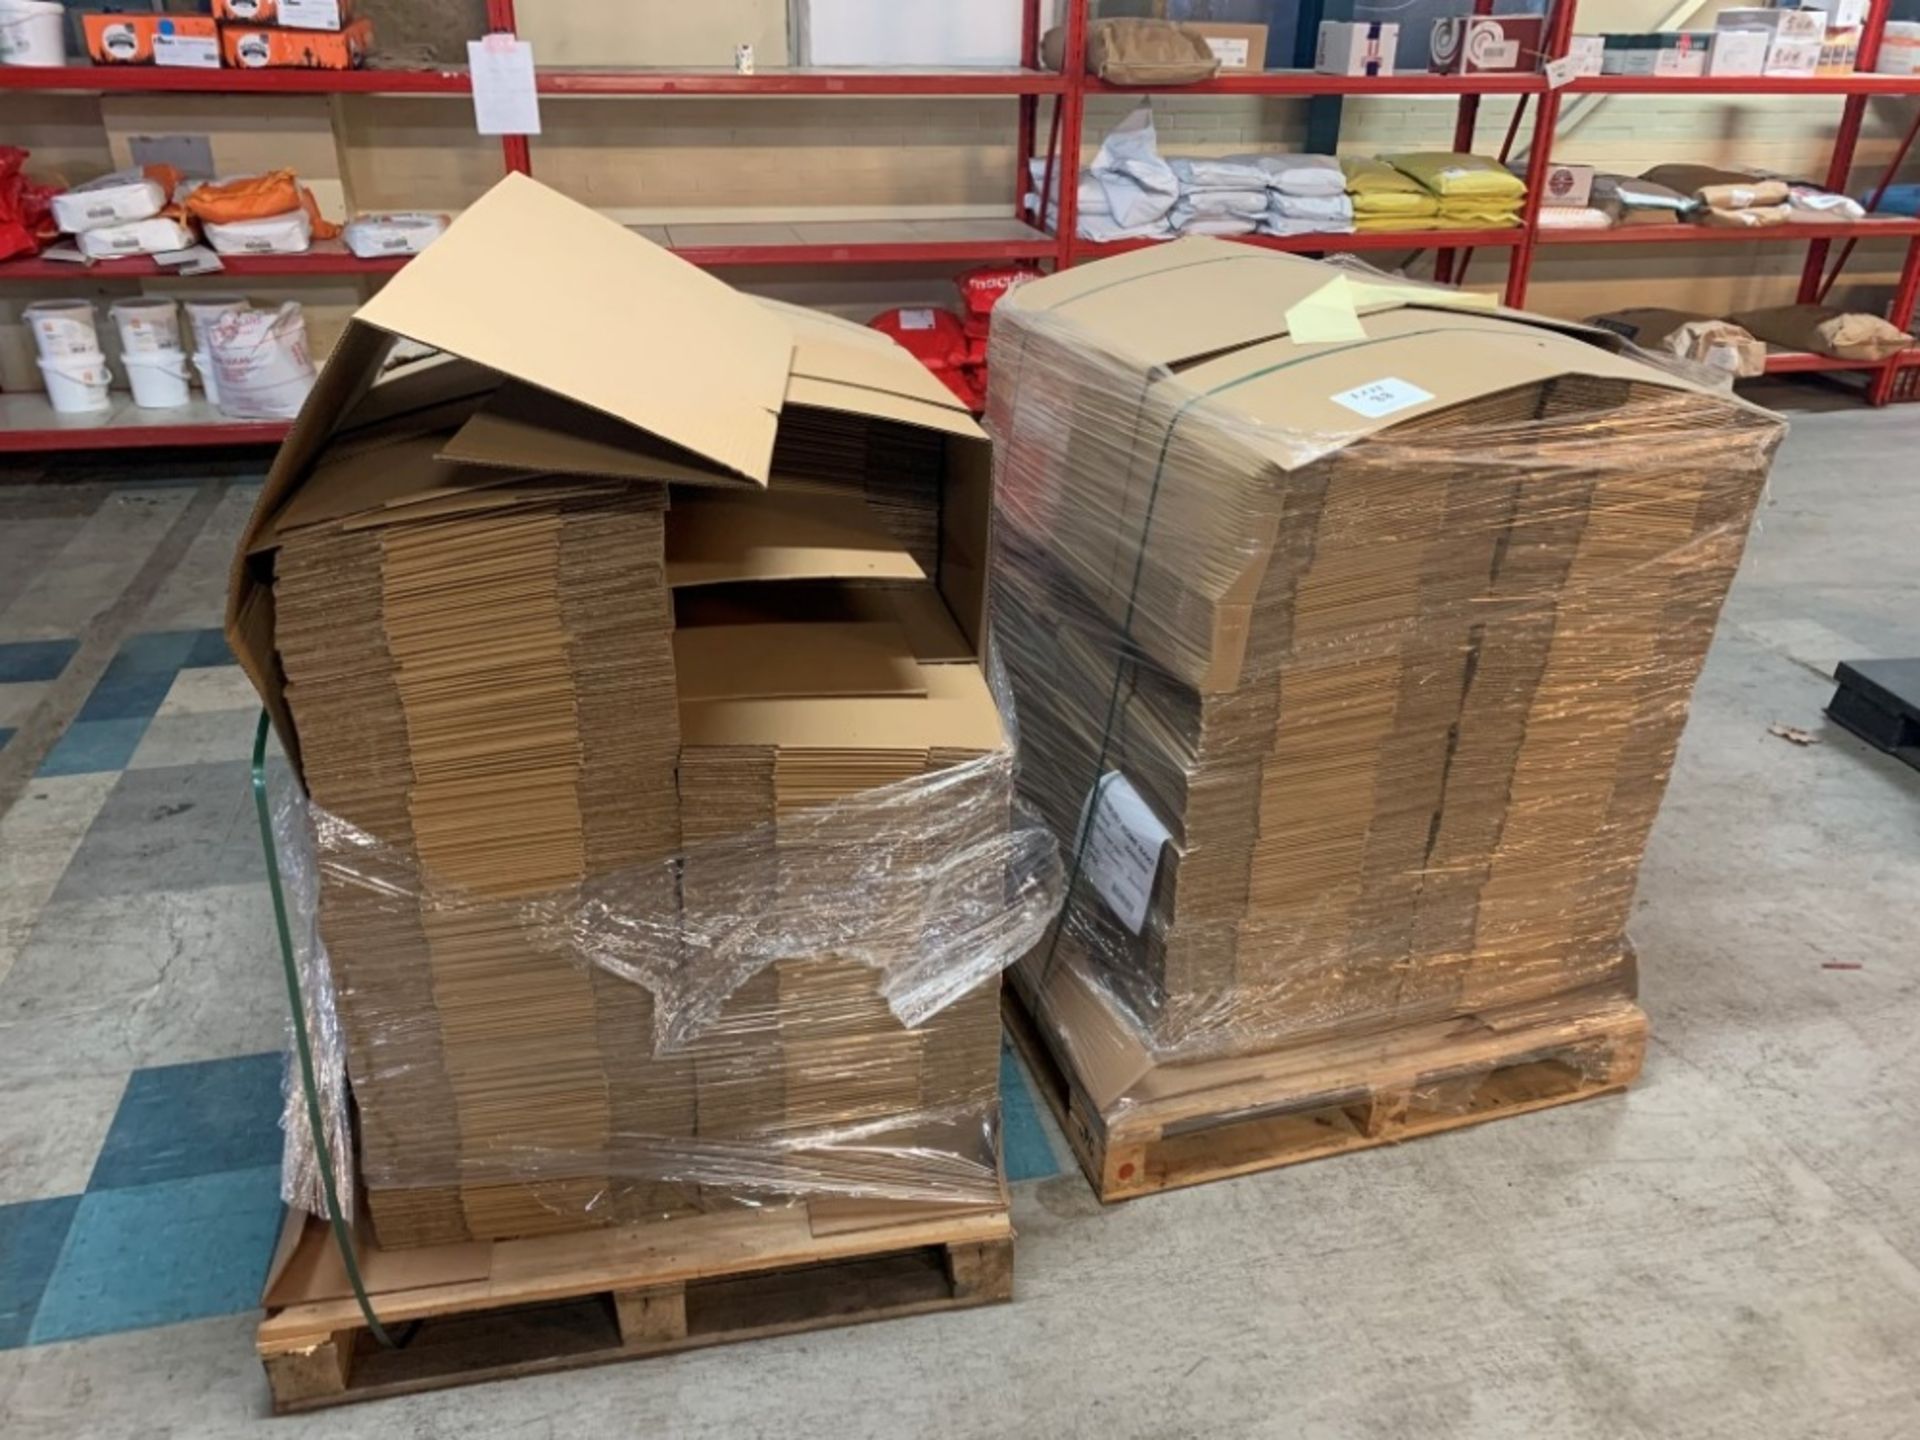 2 - pallets of cardboard boxes